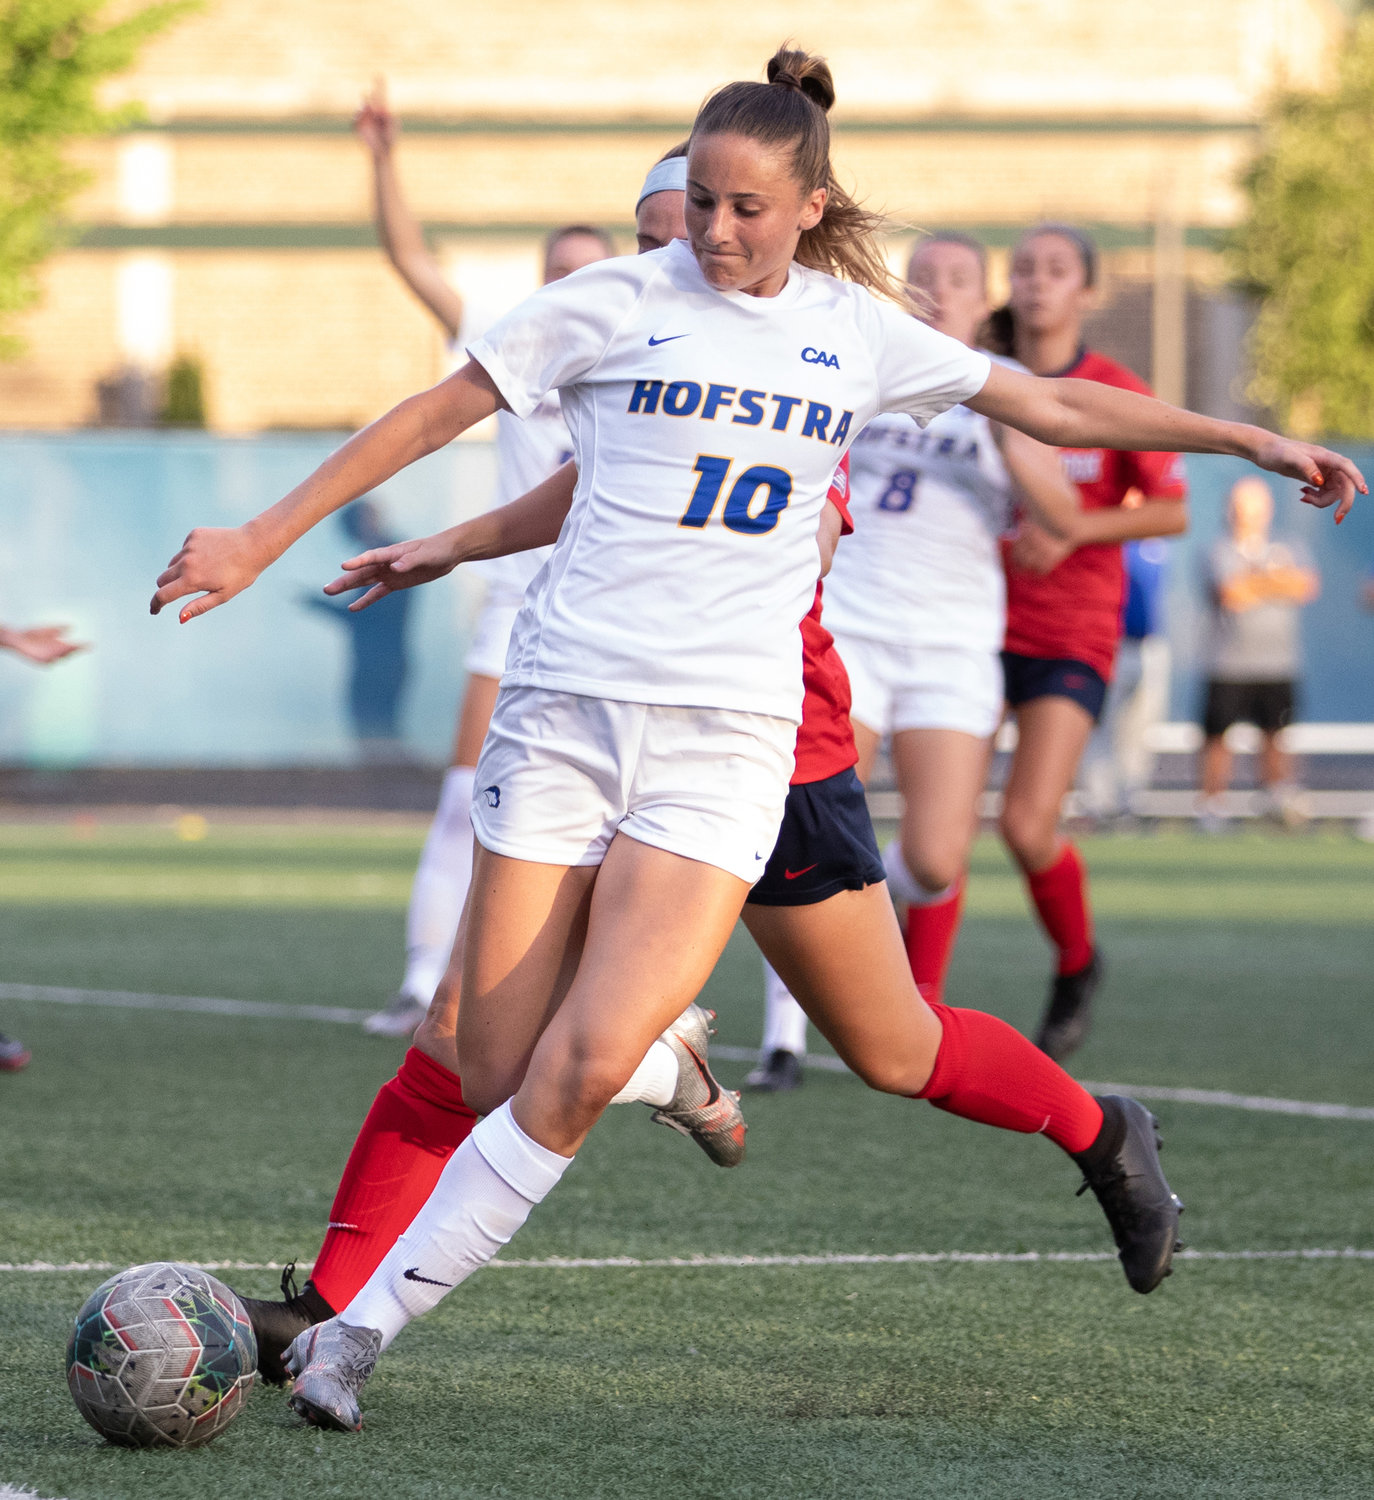 Lucy Porter ranks third on Hofstra's all-time goal-scoring list with 41 and is considered one of the top 15 collegiate players in the nation according to Top Drawer.